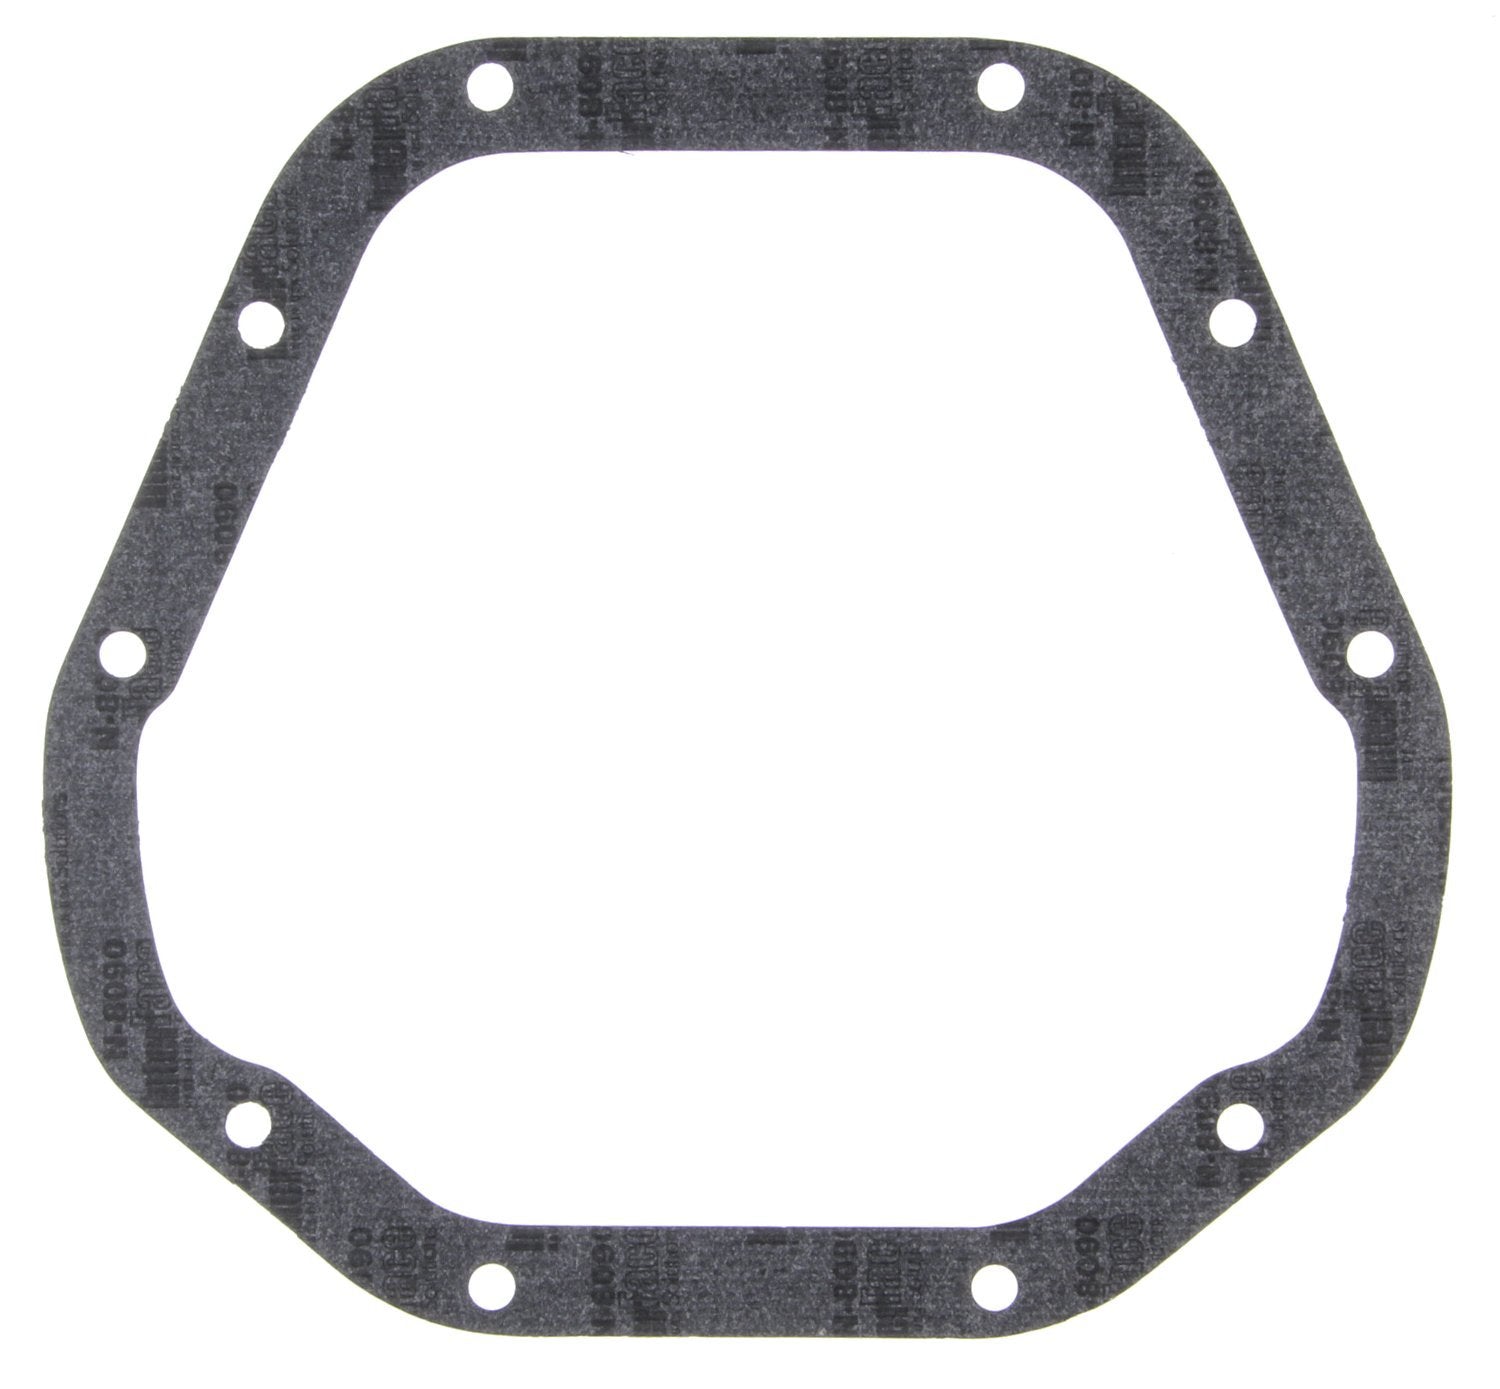 MAHLE Axle Housing Cover Gasket P18562